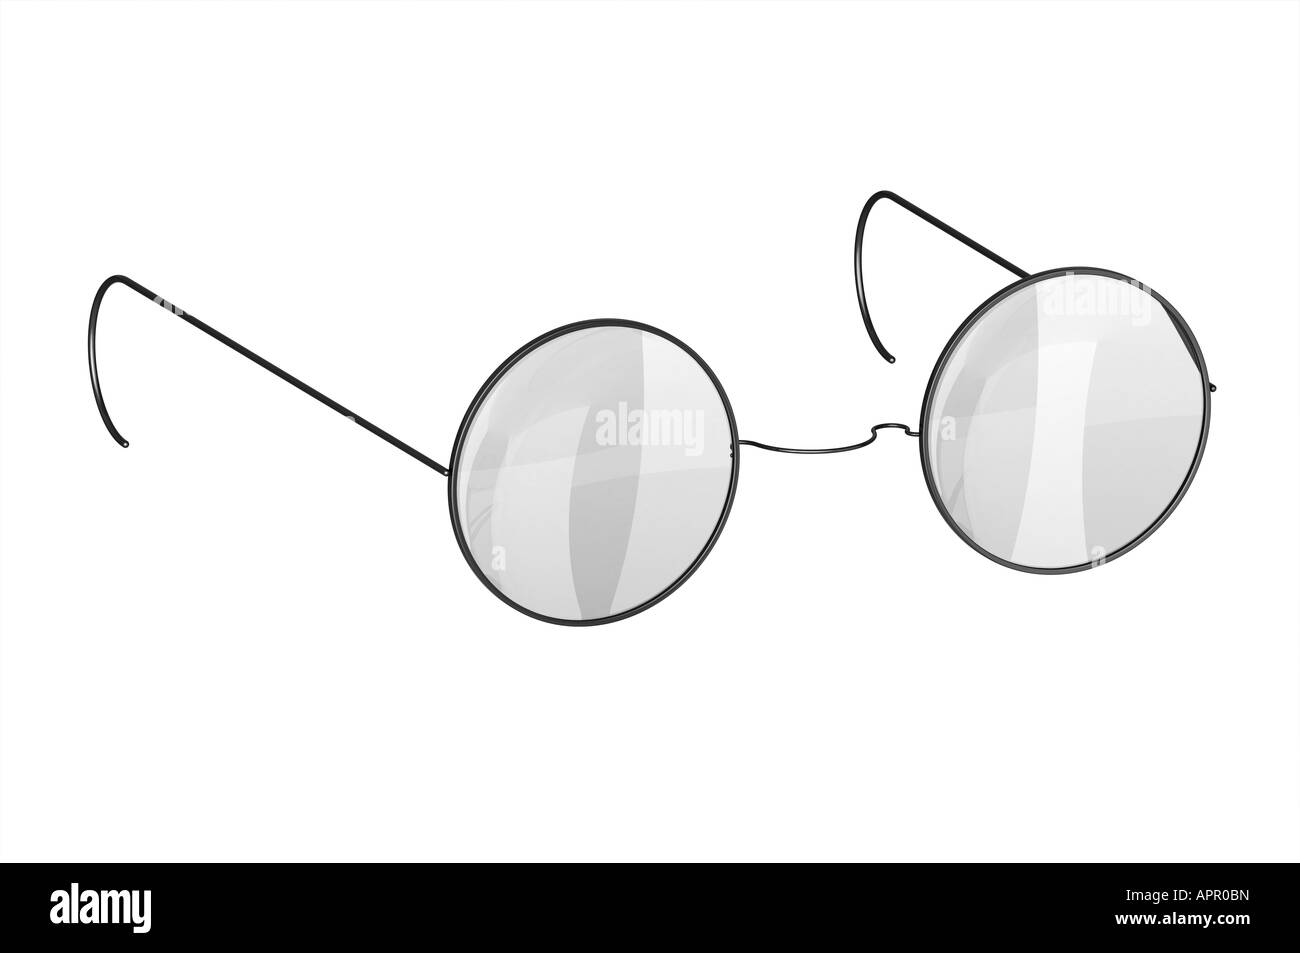 Round spectacles glasses Stock Photo